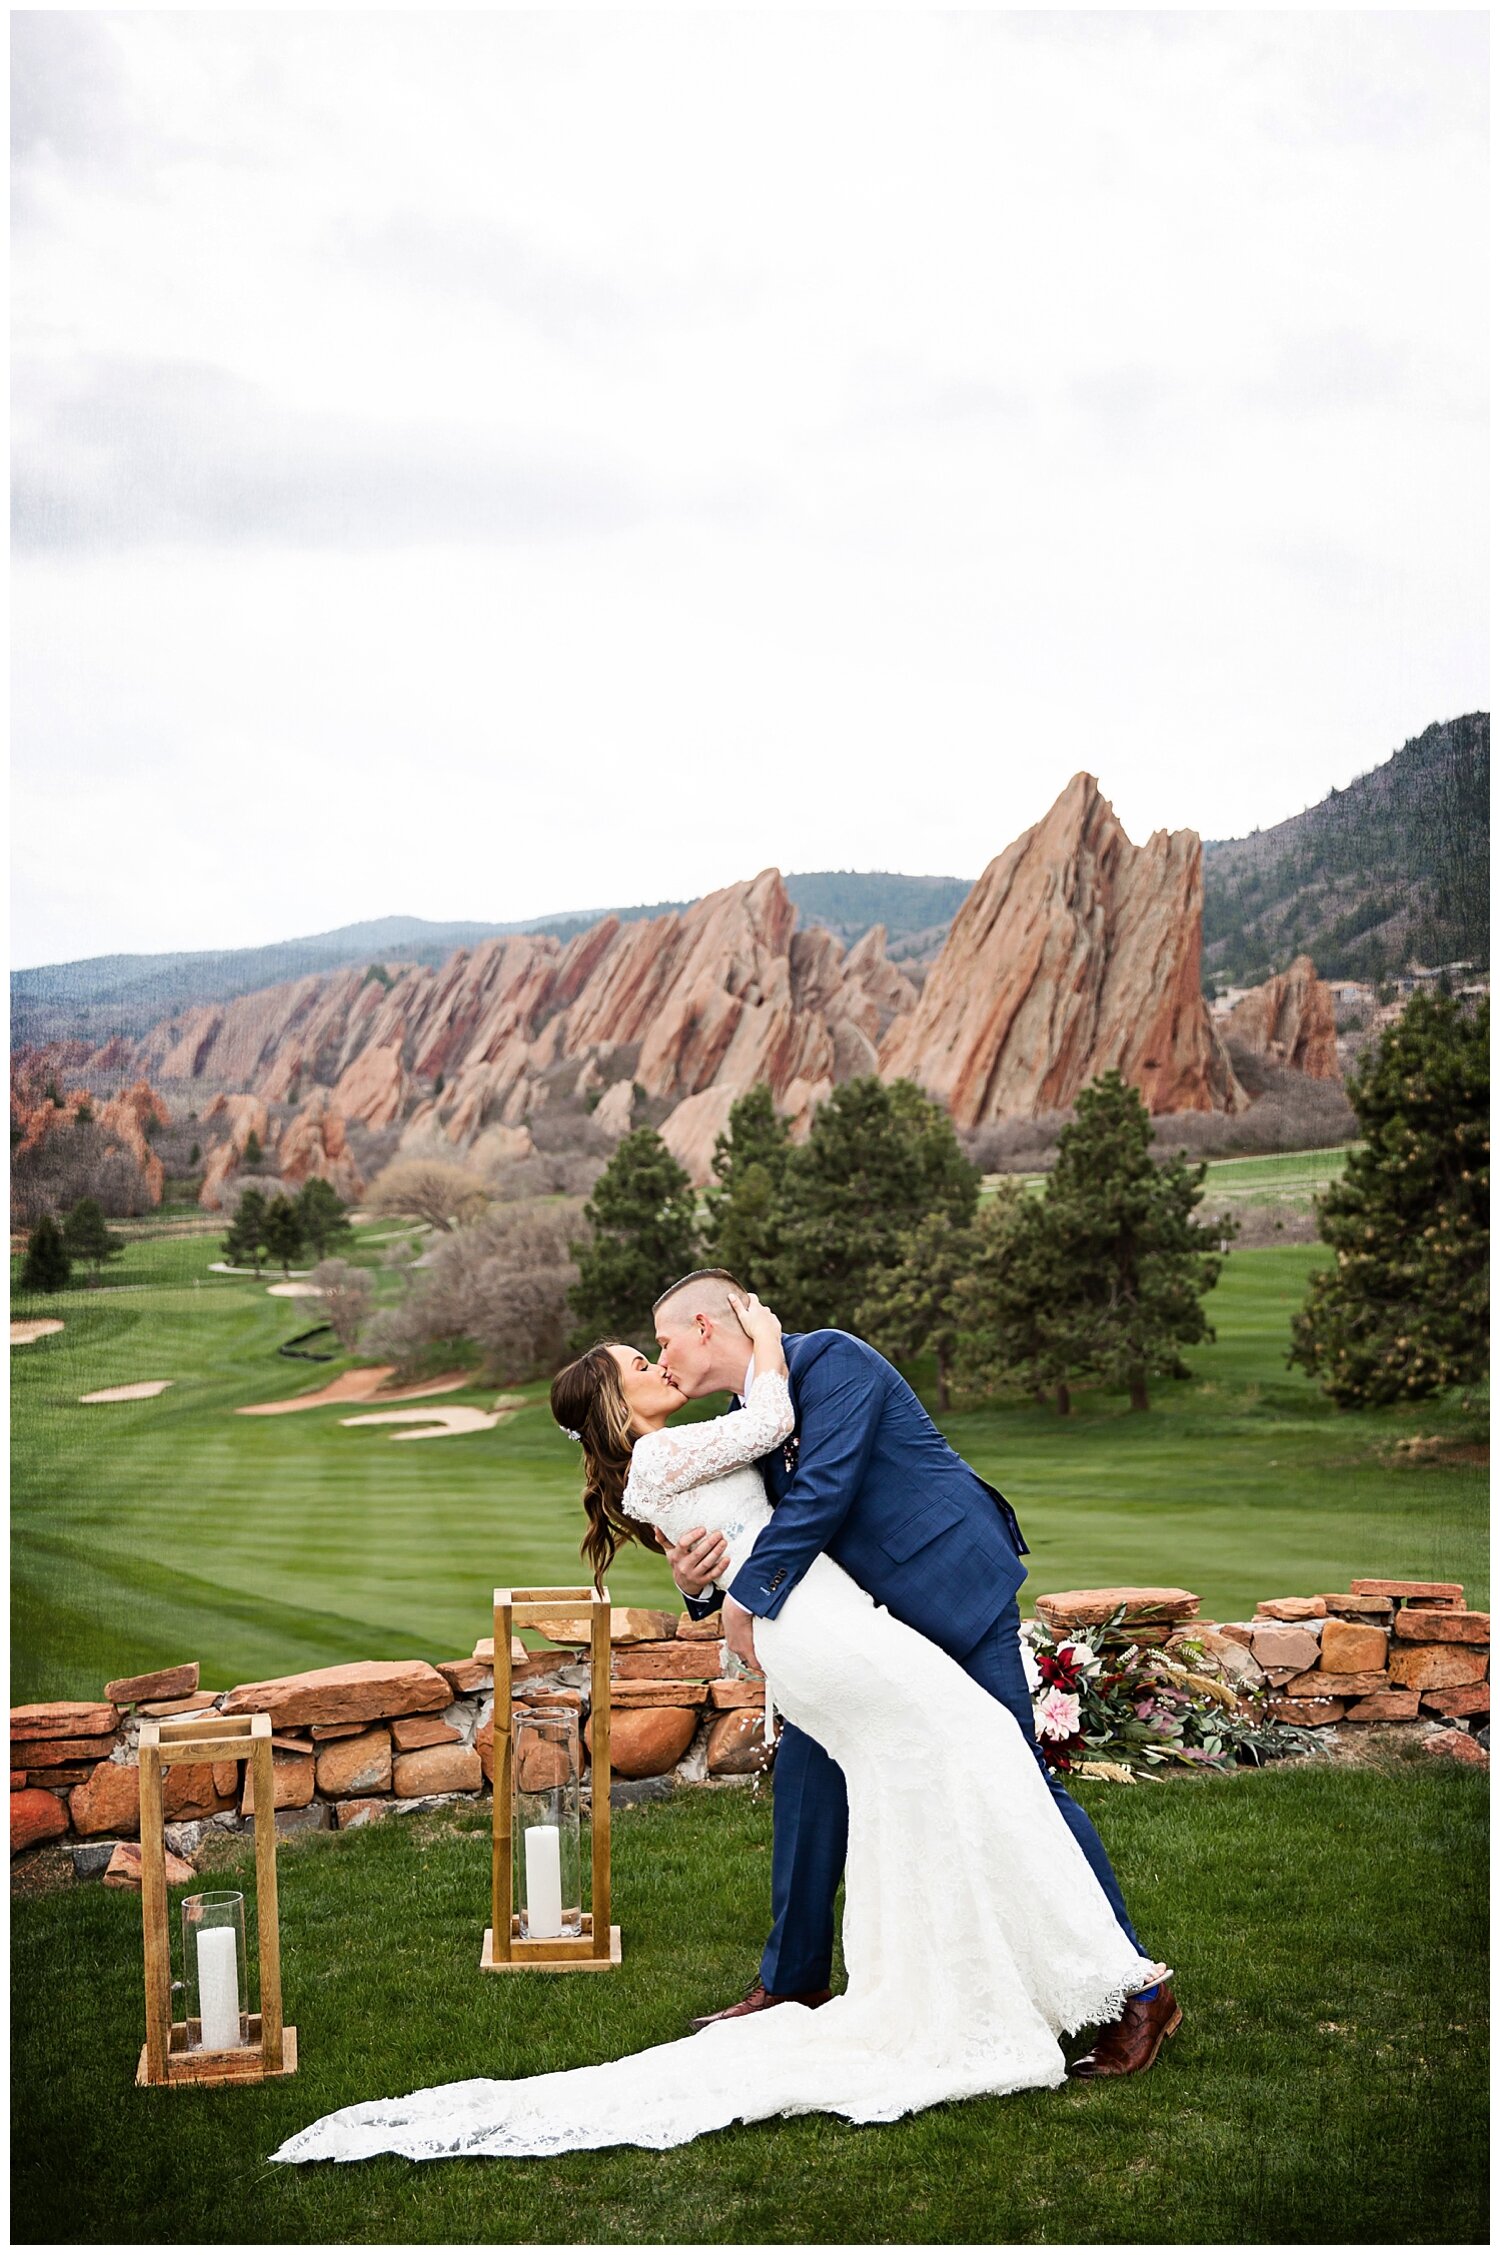 Molly and Nick's Wedding Day|Arrowhead Golf Course Elopement_0046.jpg